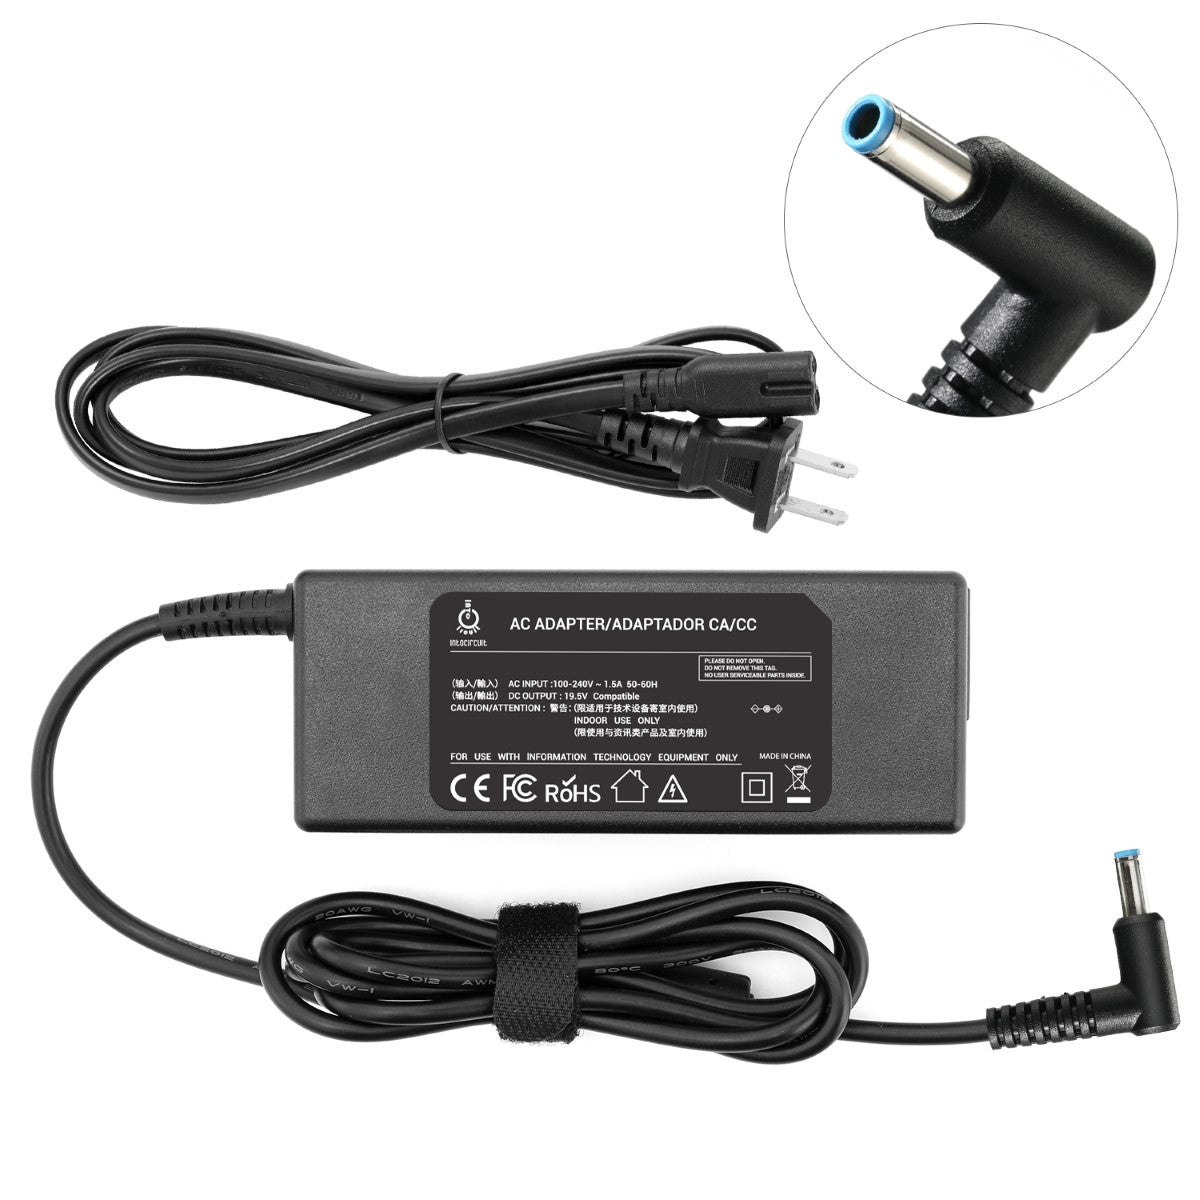 Charger for HP Envy 15t-u000 CTO X360 Convertible Laptop